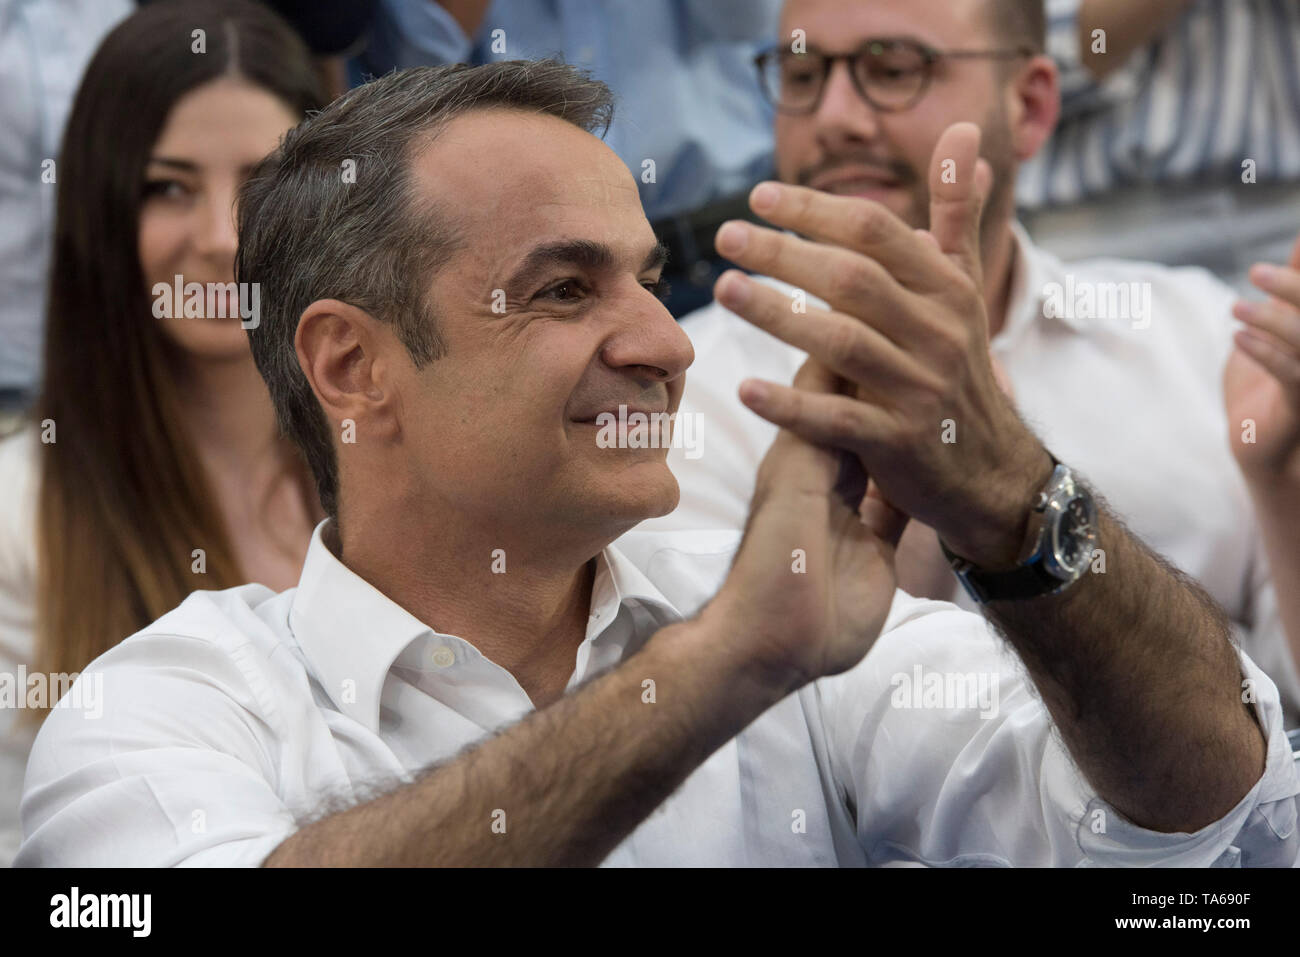 Athens, Greece. 22nd May 2019. KYRIAKOS MITSOTAKIS, leader of the conservative New Democracy party addresses supporters. New Democracy fans attended the party’s main pre-election rally in Athens as Greeks will vote for European Parliament and municipalities on May 26th.© Nikolas Georgiou / Alamy Live News Stock Photo